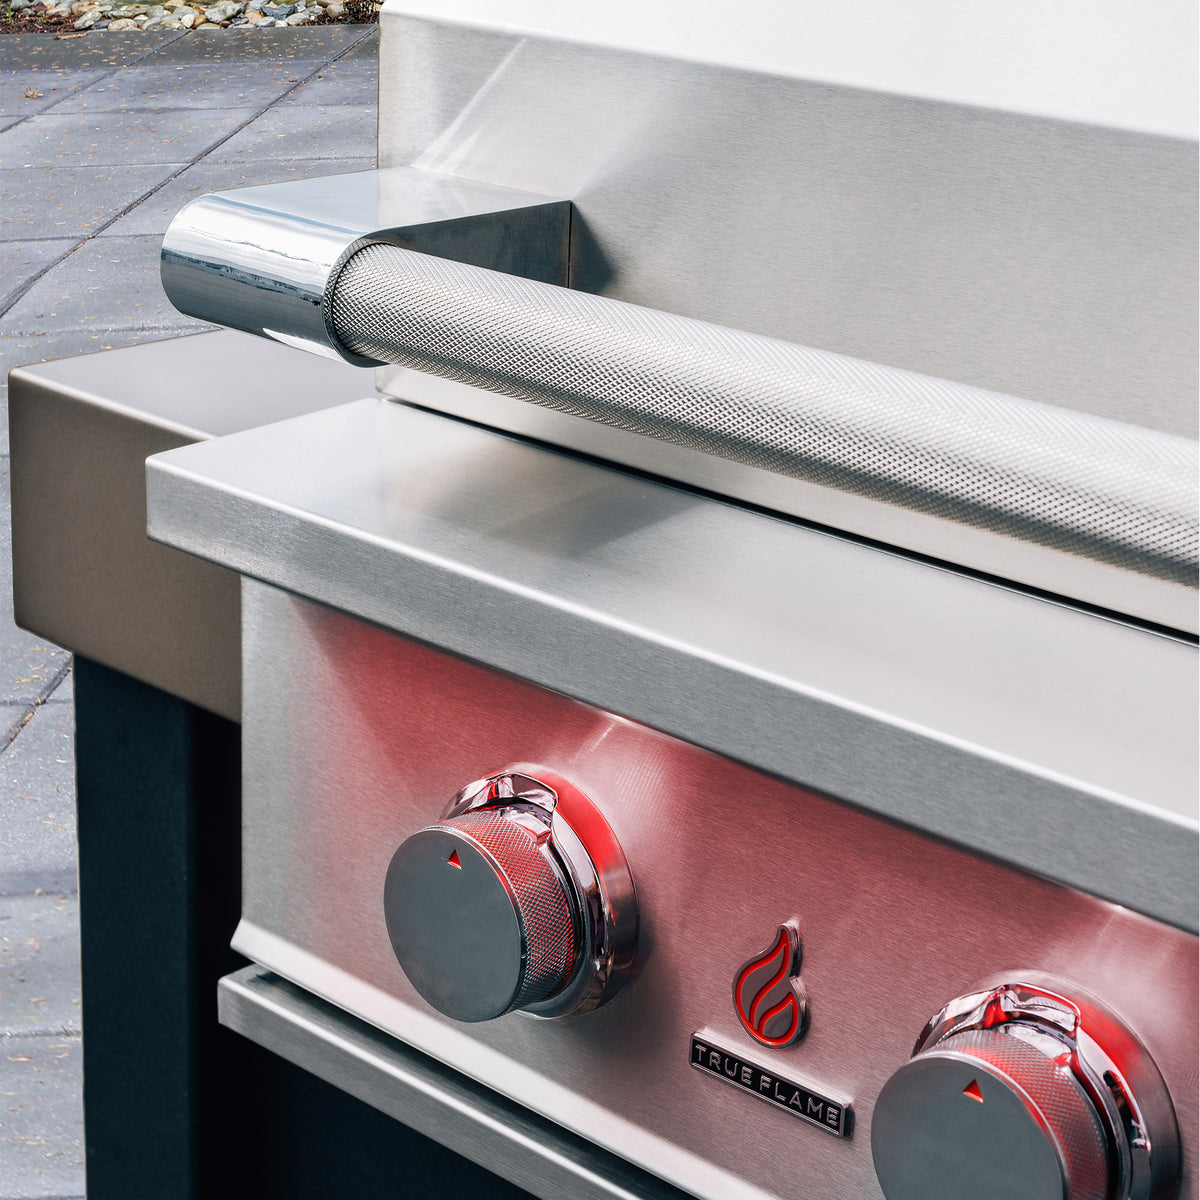 TrueFlame 25 Inch Built-In Grill